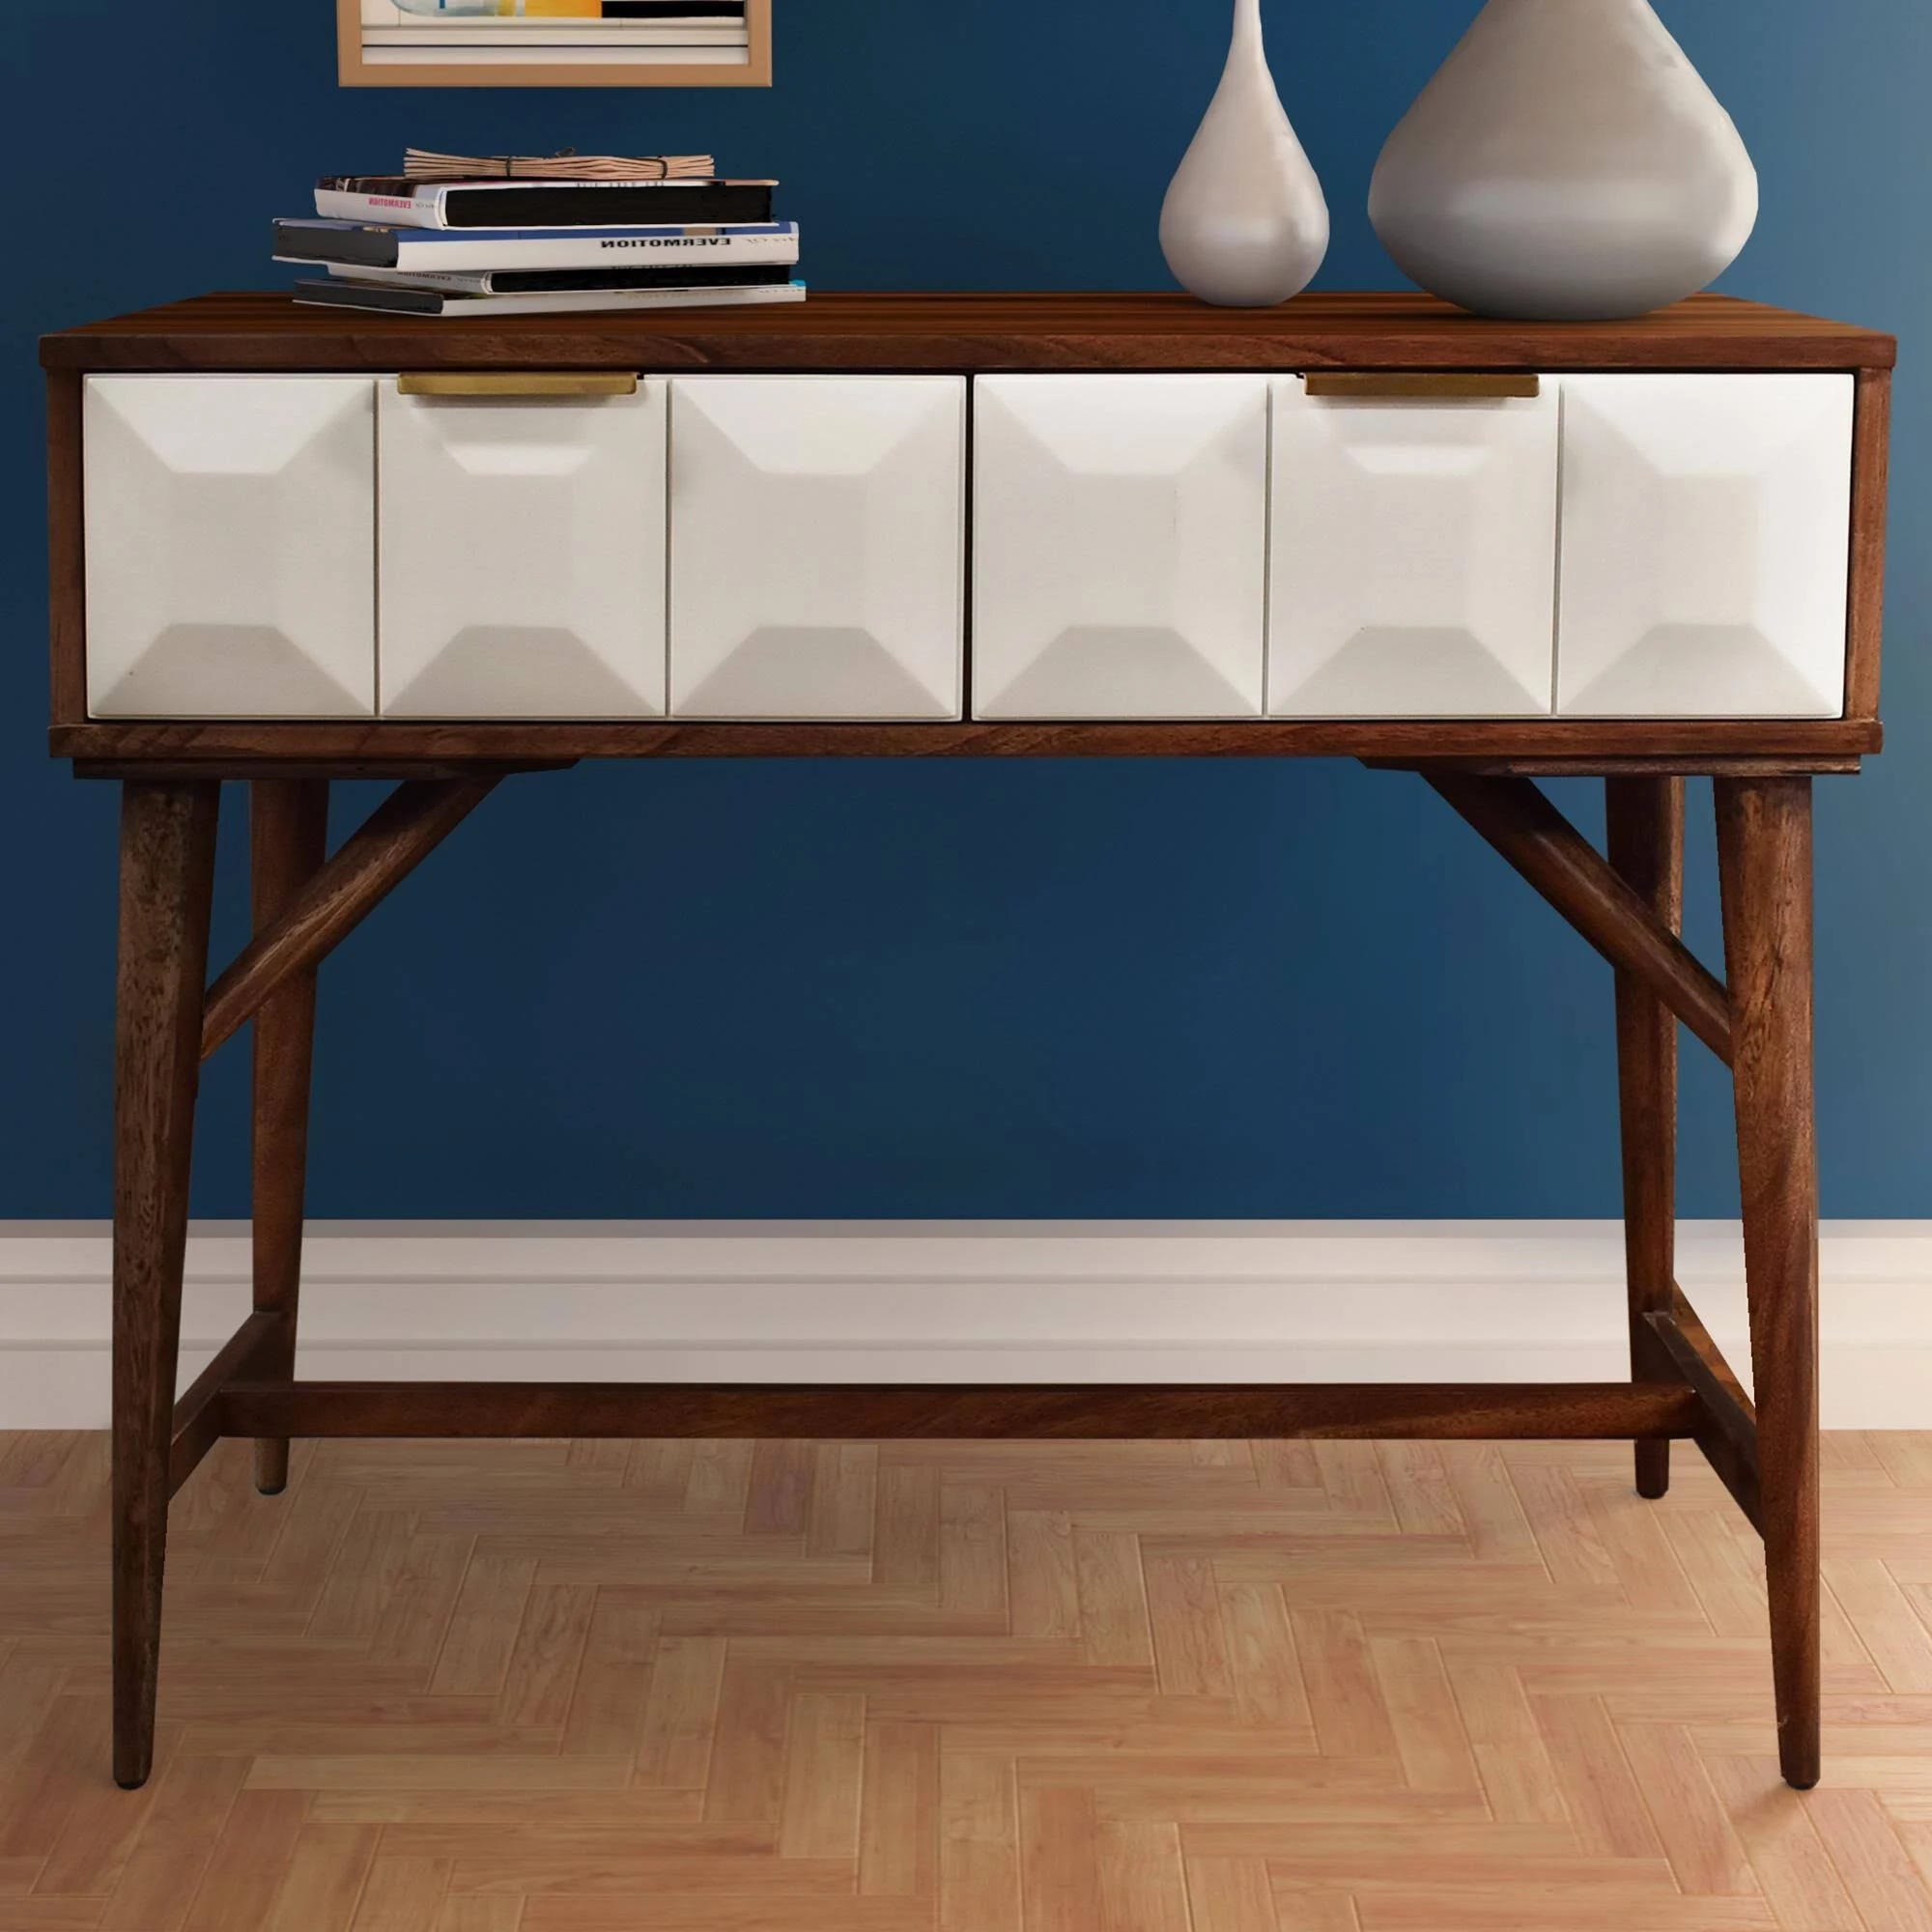 Vintage-inspired brown wood rectangular console table | Image